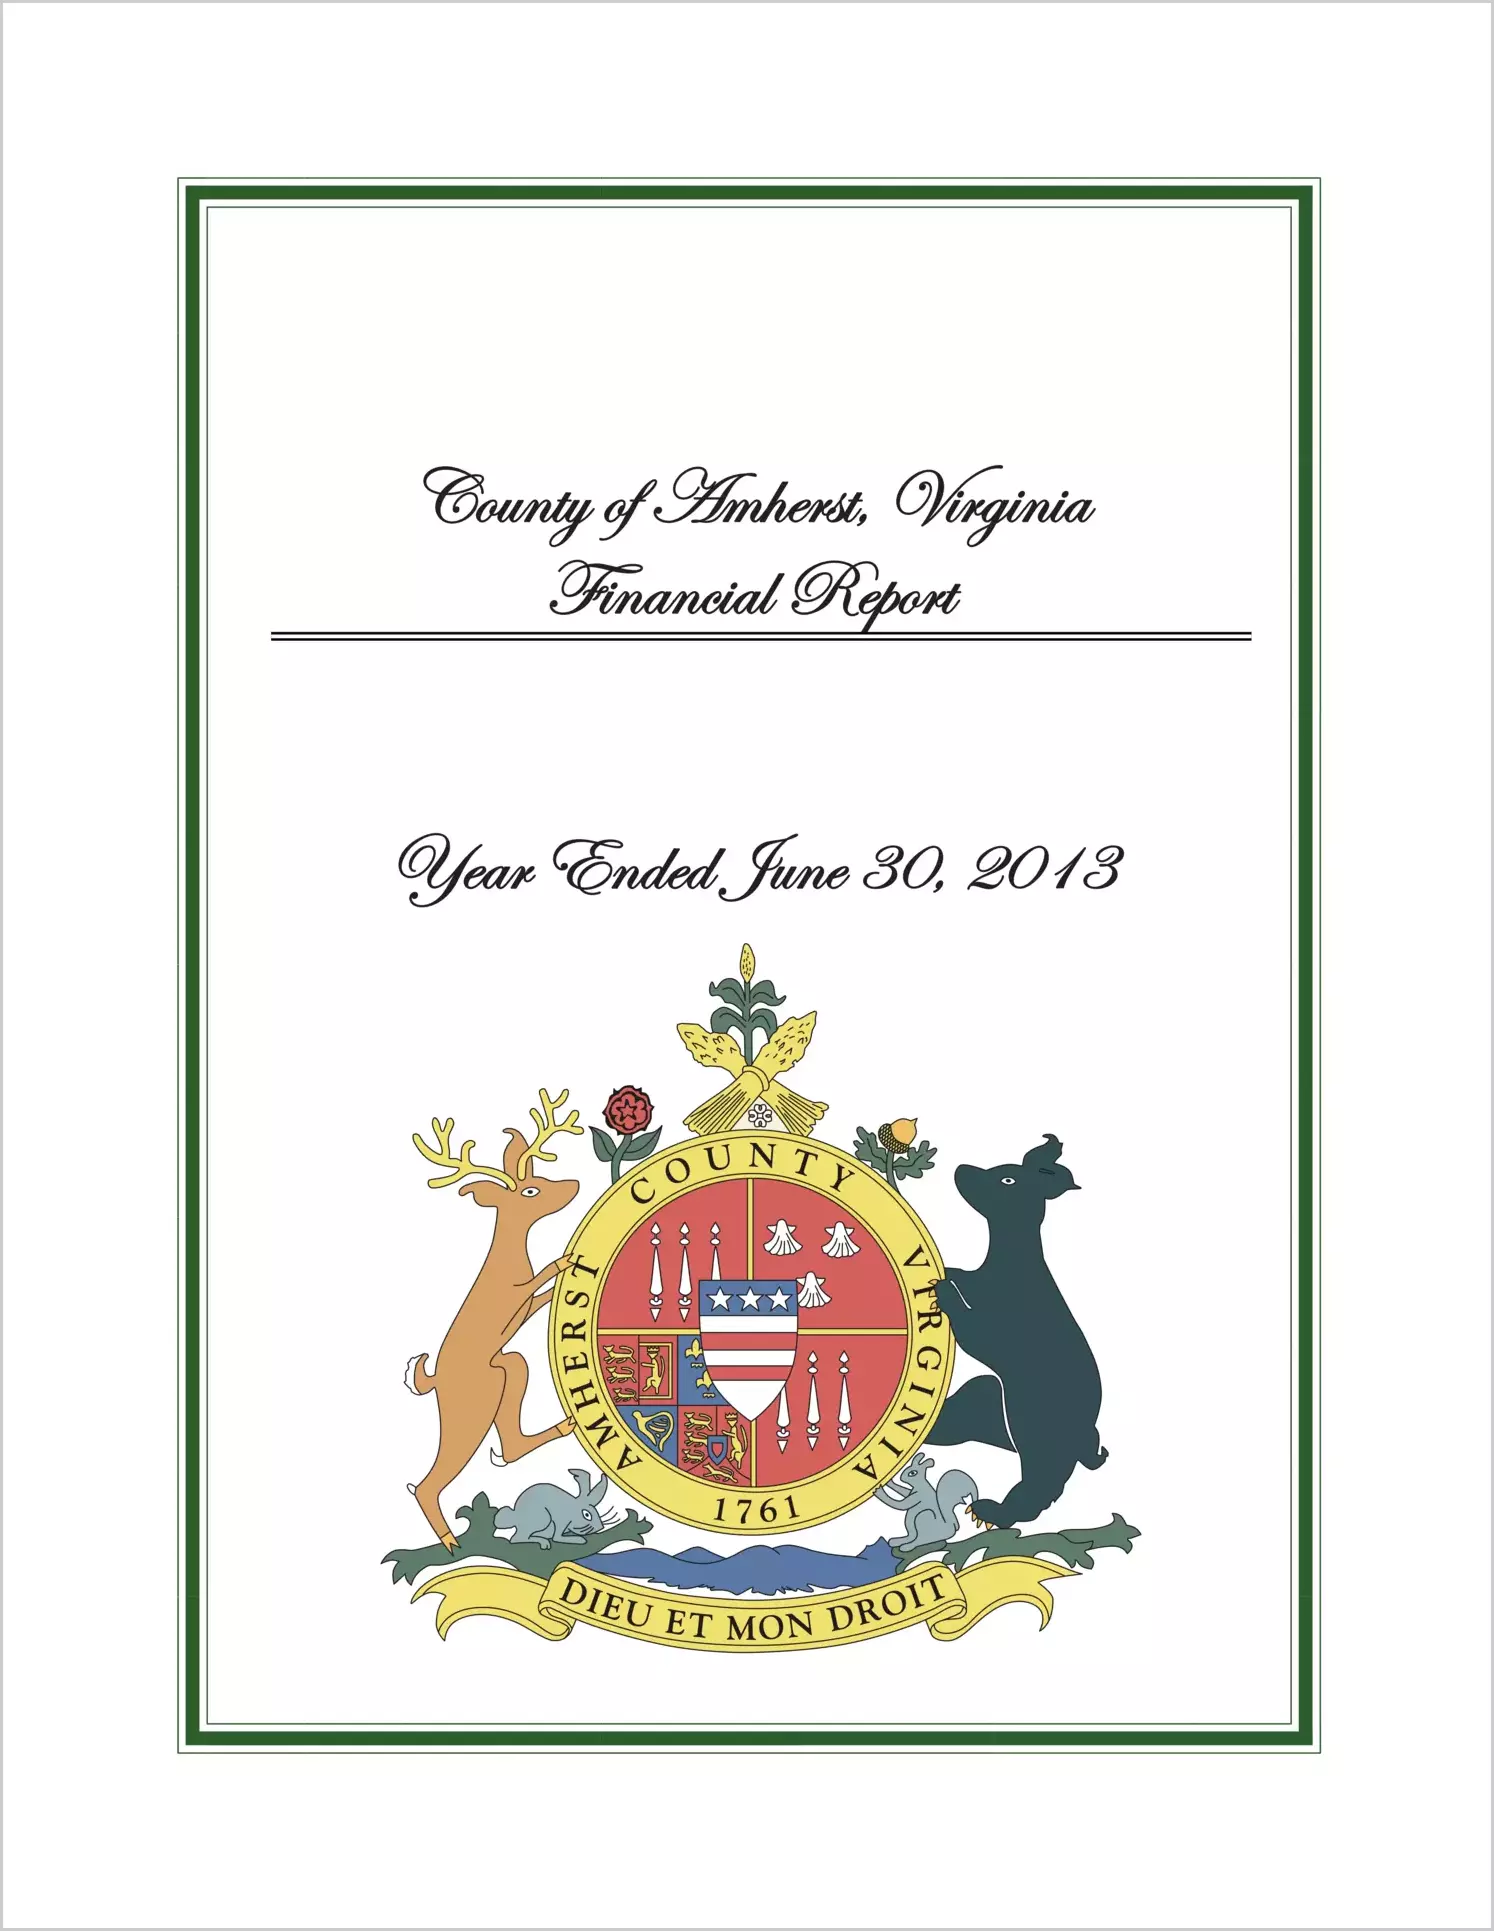 2013 Annual Financial Report for County of Amherst